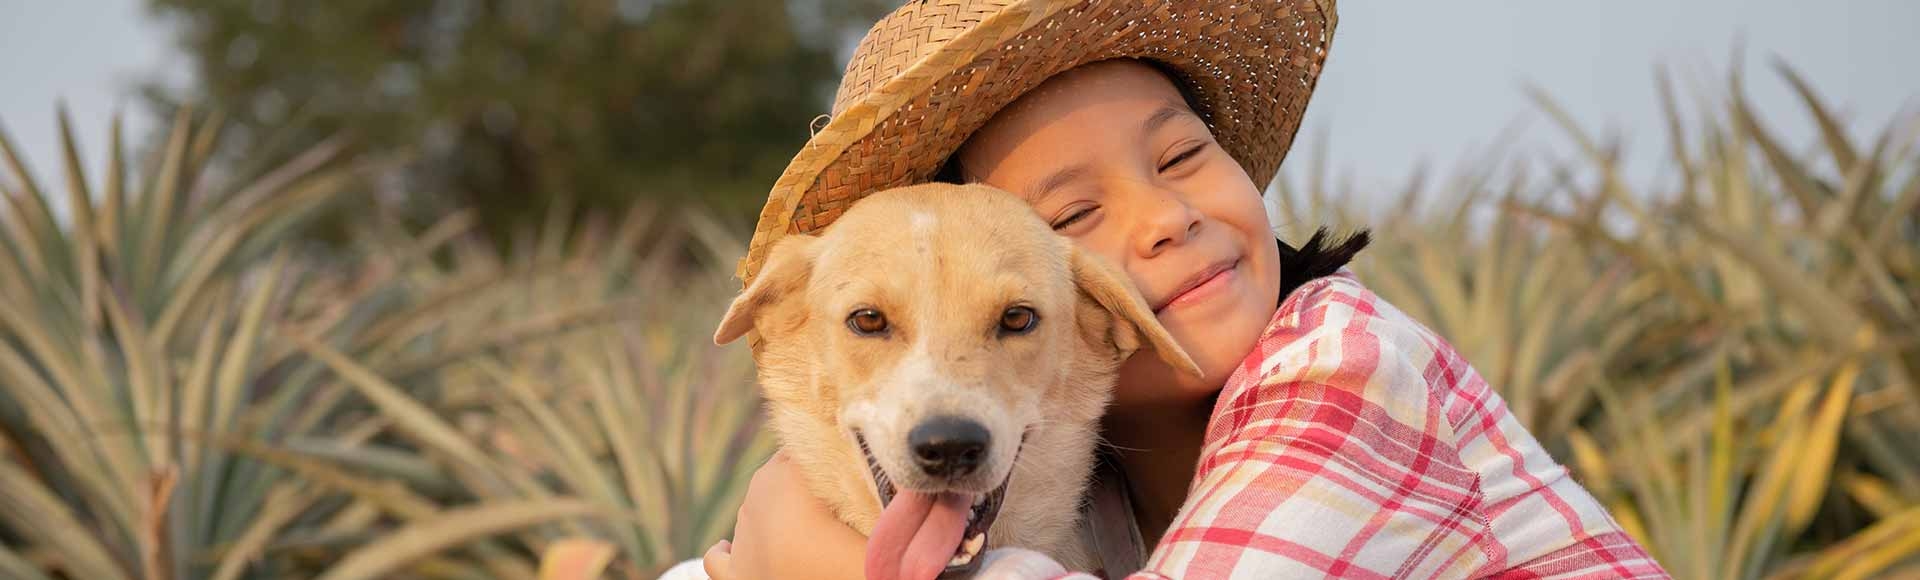 How Kids Benefit From Having or Being Around Dogs